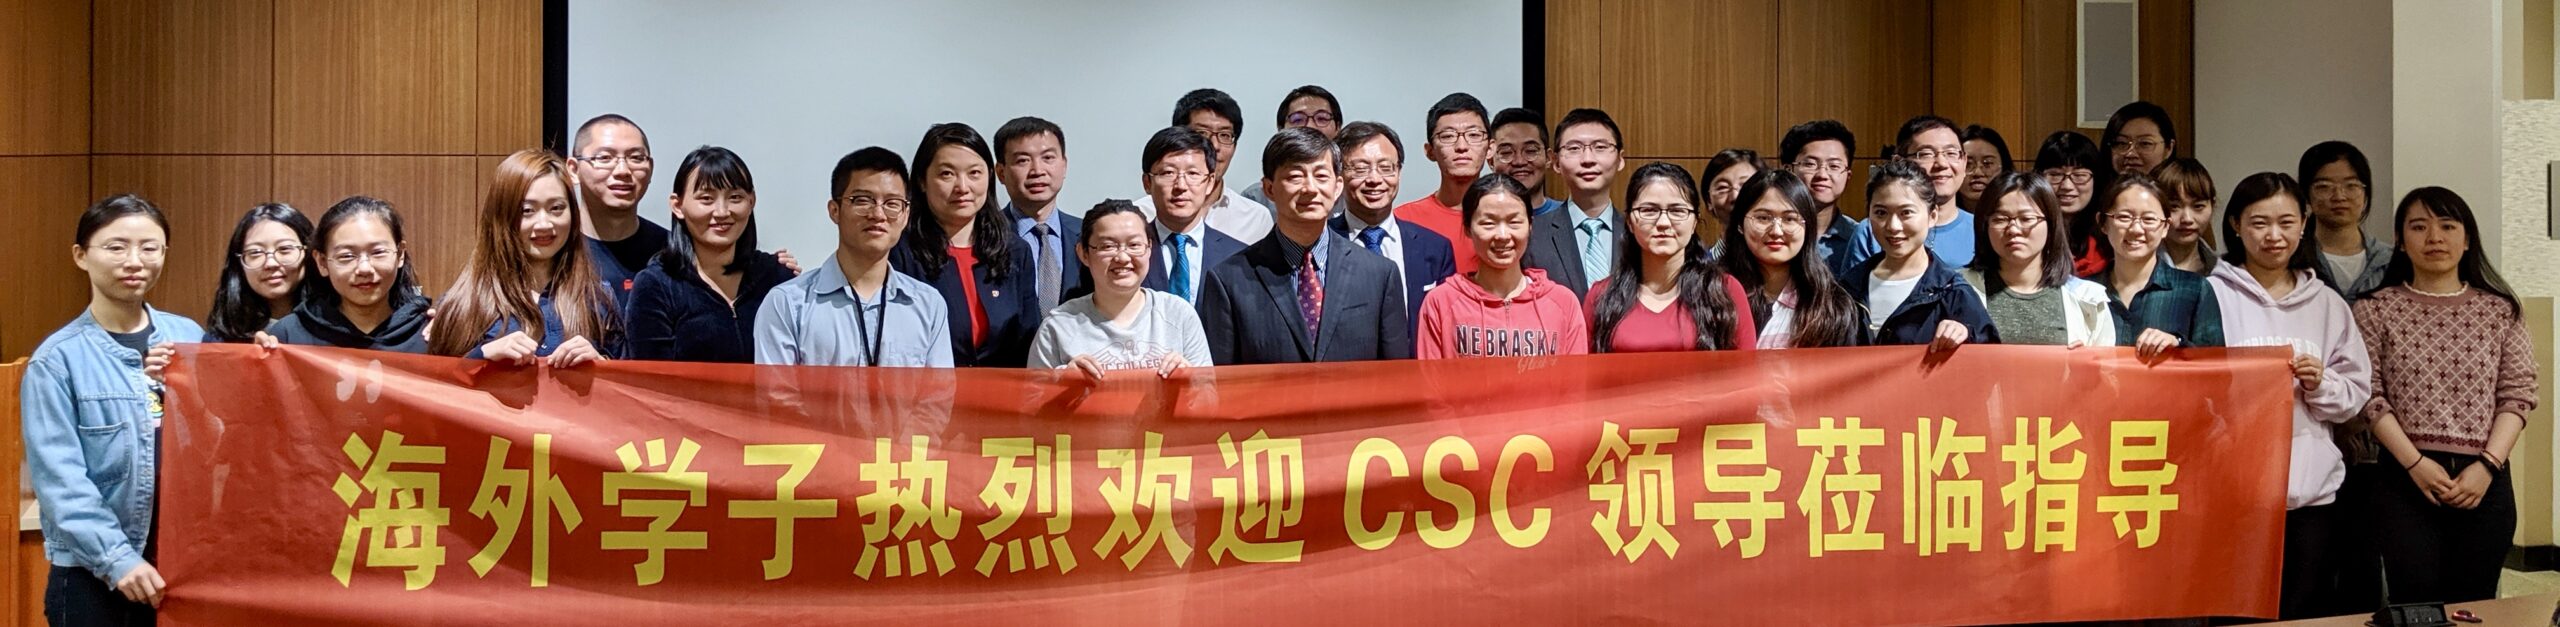 China Scholarship Council students with the CSC delegation.